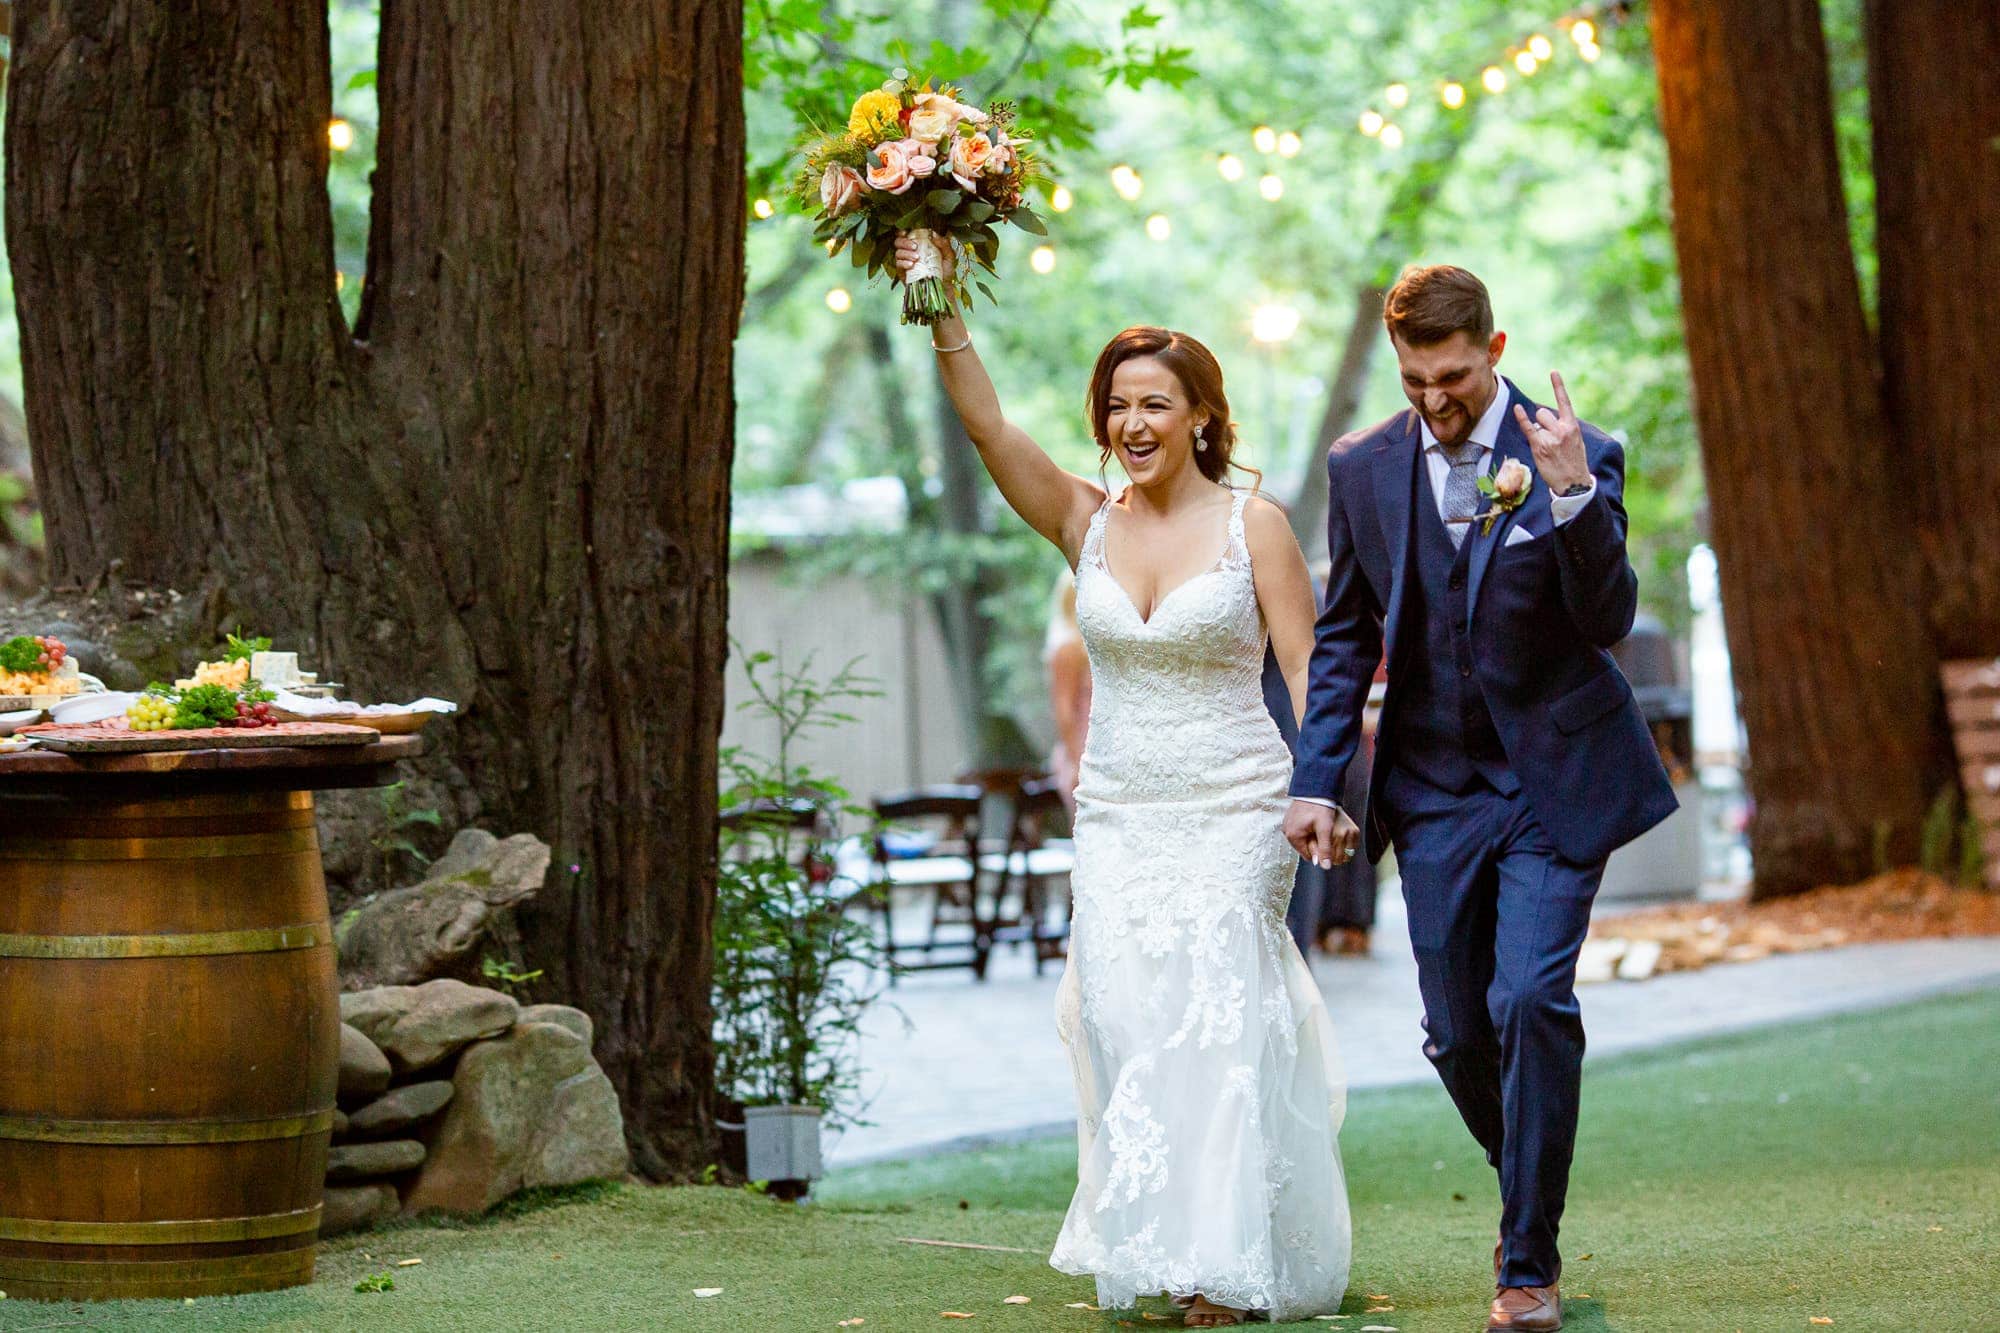 Bride and Groom making an entrance to outdoor reception in Saratoga Springs